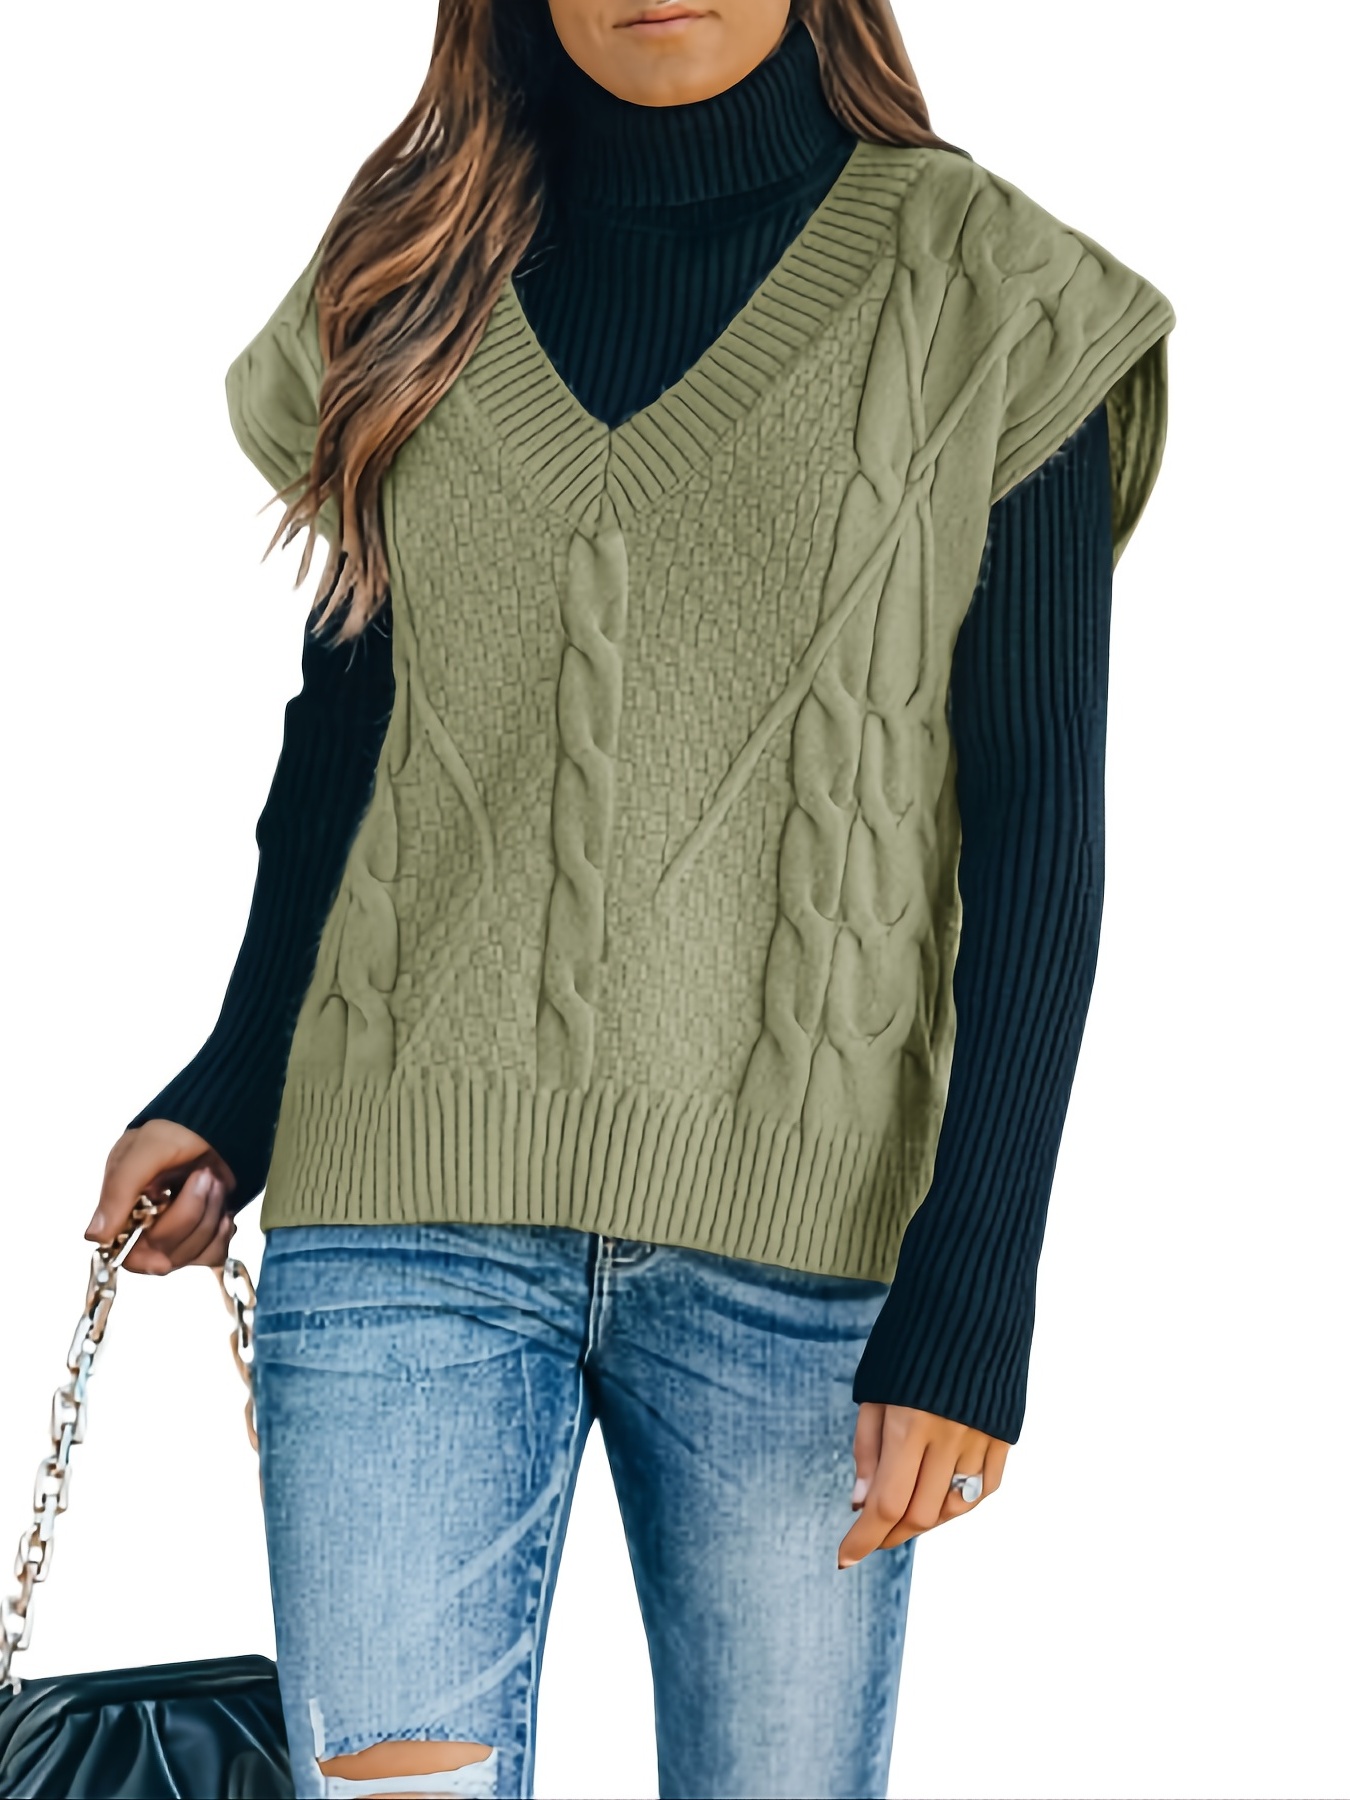 VSSSJ Oversized Sweater Vest for Women V Neck Sleeveless Solid Color Loose  Pullover Sweater Casual Chunky Cable Knit Tank Tops Khaki S